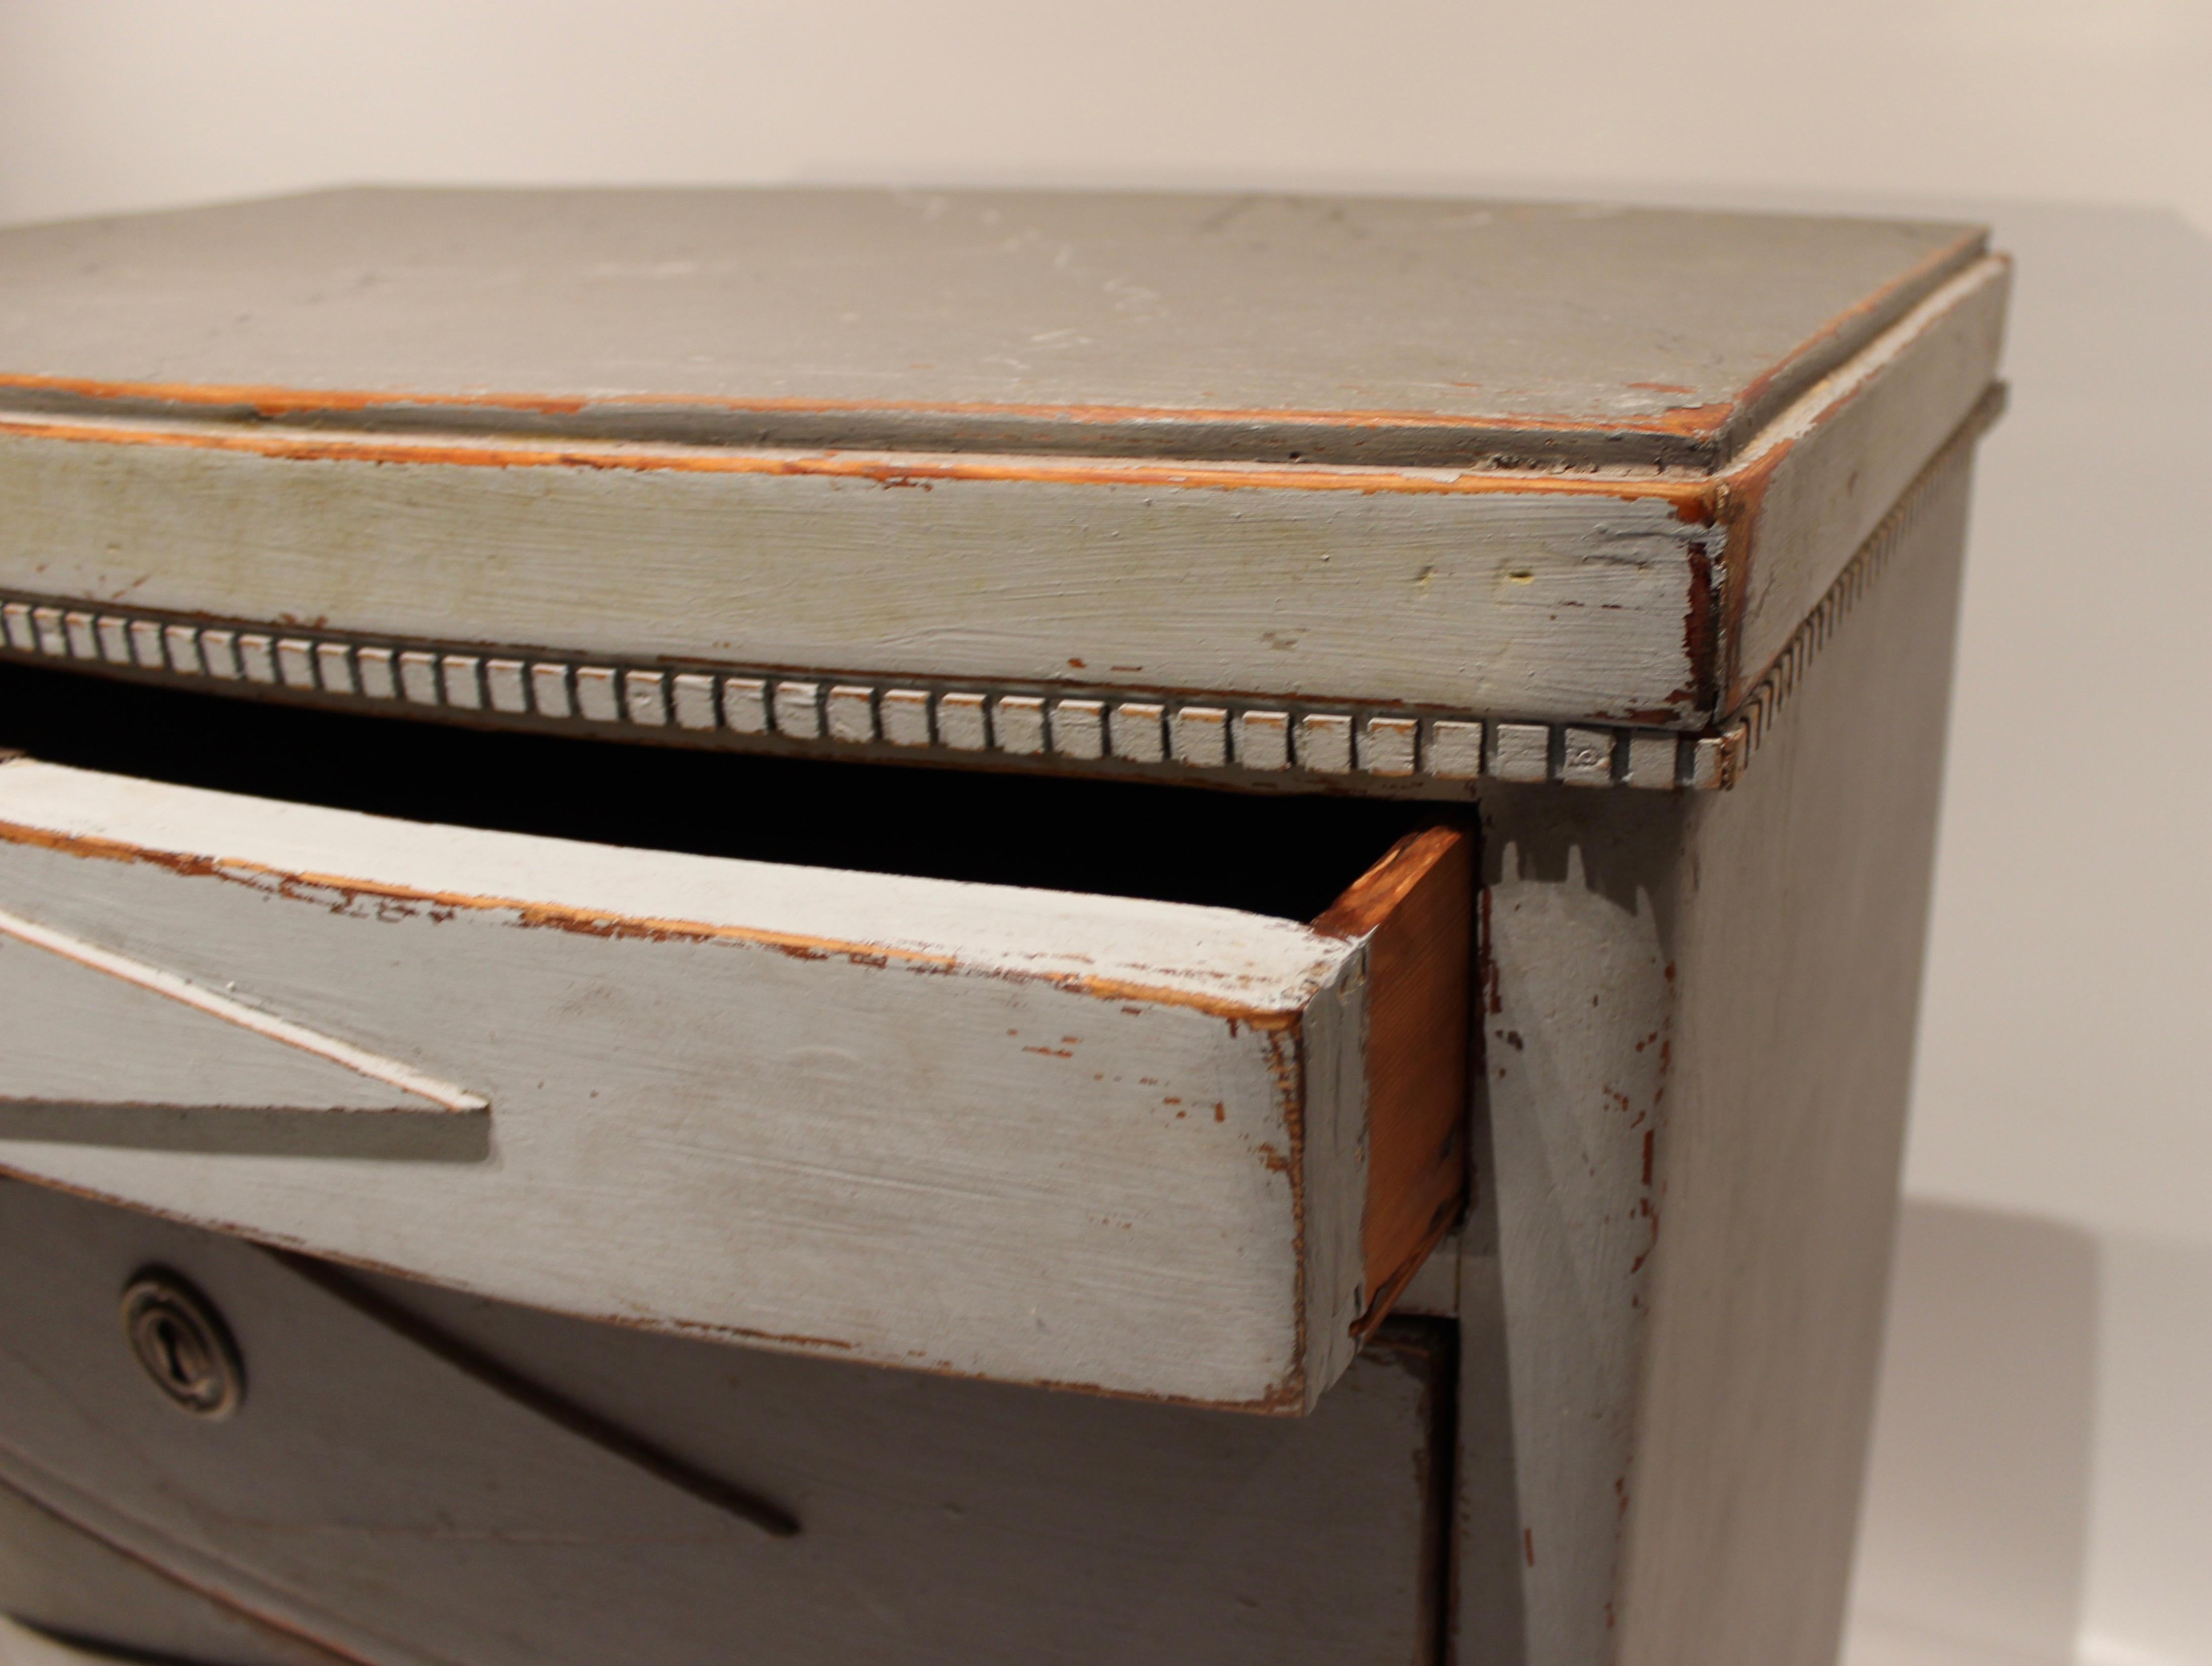 Gustavian Grey Painted Chest of Drawers with Curved Front, 1830s (Mittleres 19. Jahrhundert)